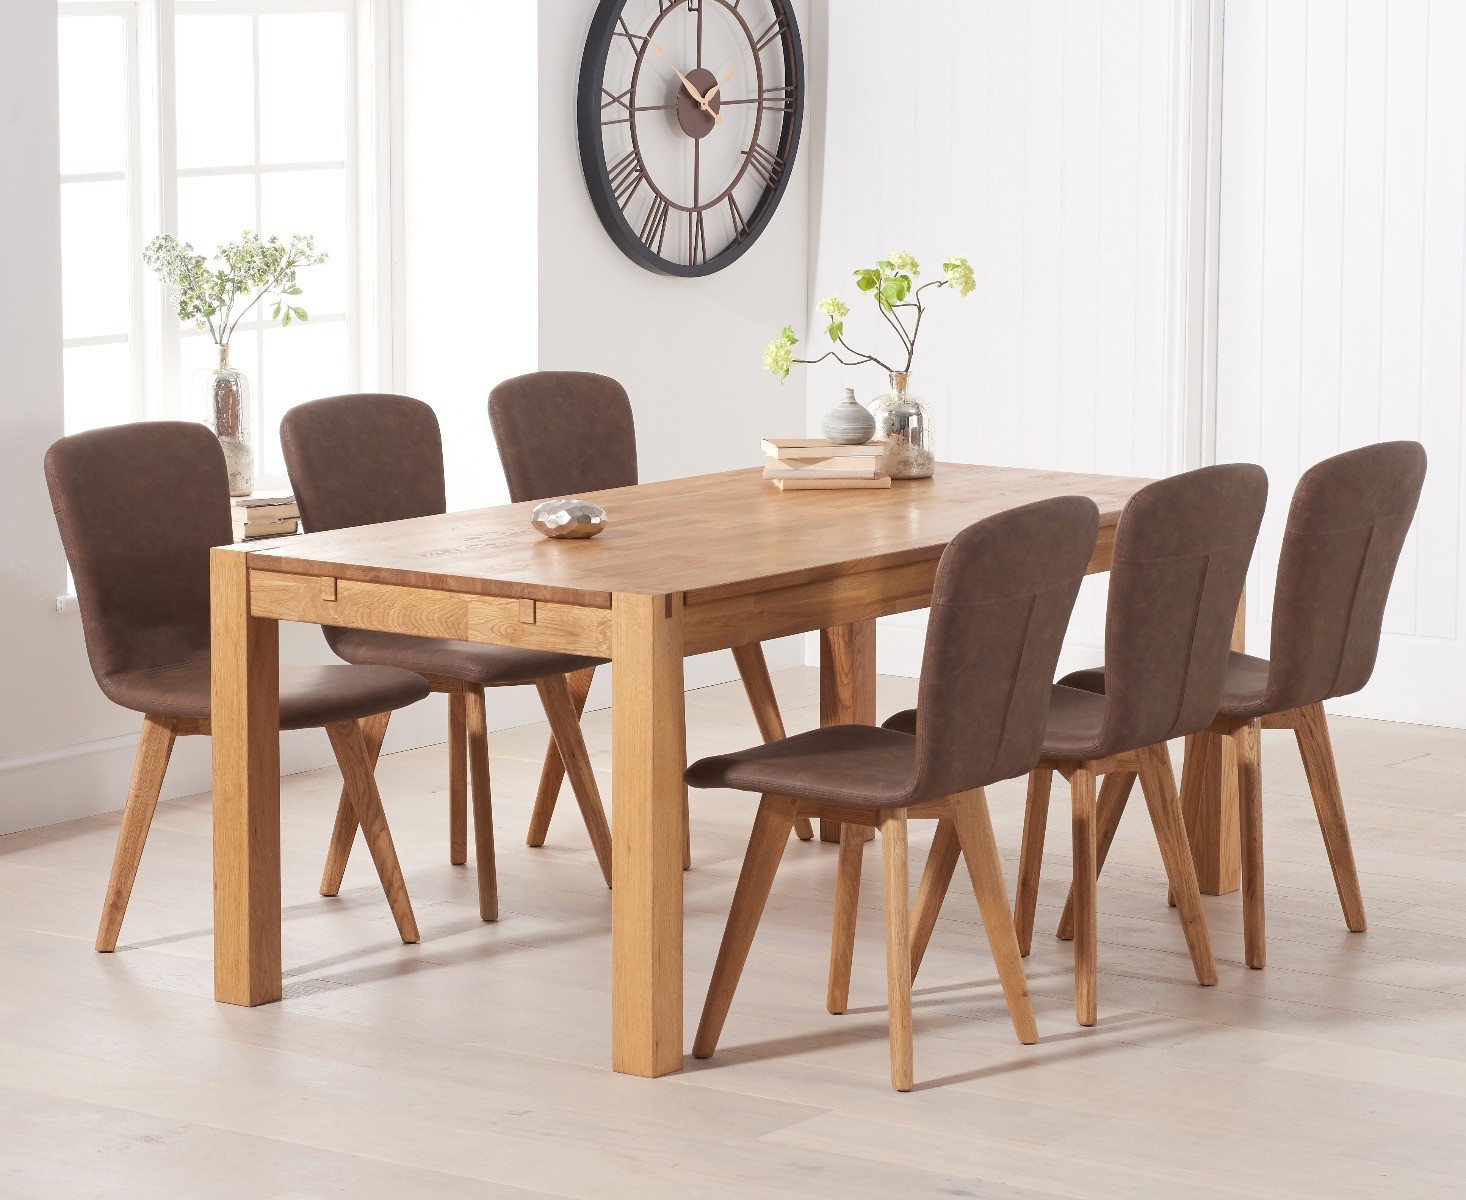 Photo 3 of Thetford 150cm oak dining table with 4 grey ruben chairs